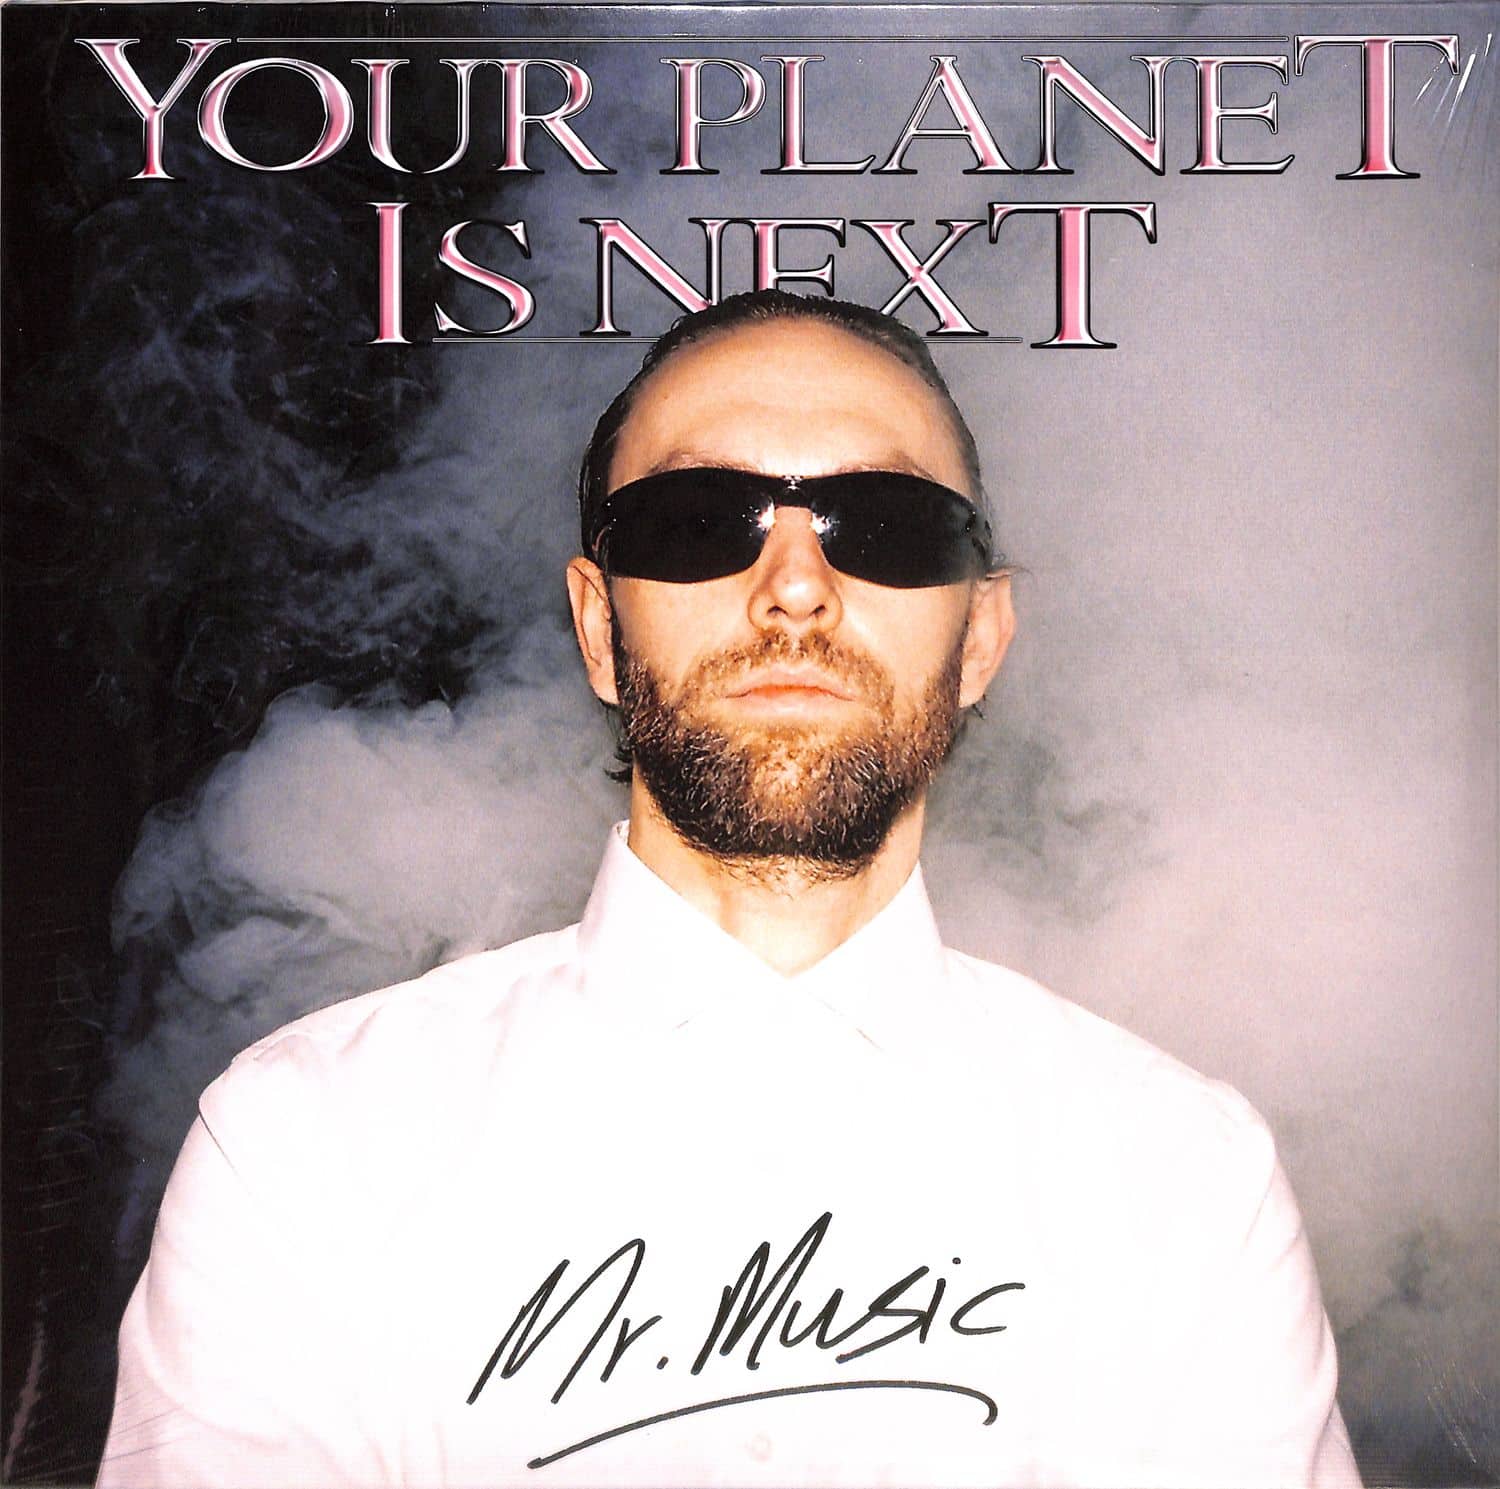 Your Planet Is Next - MR MUSIC 